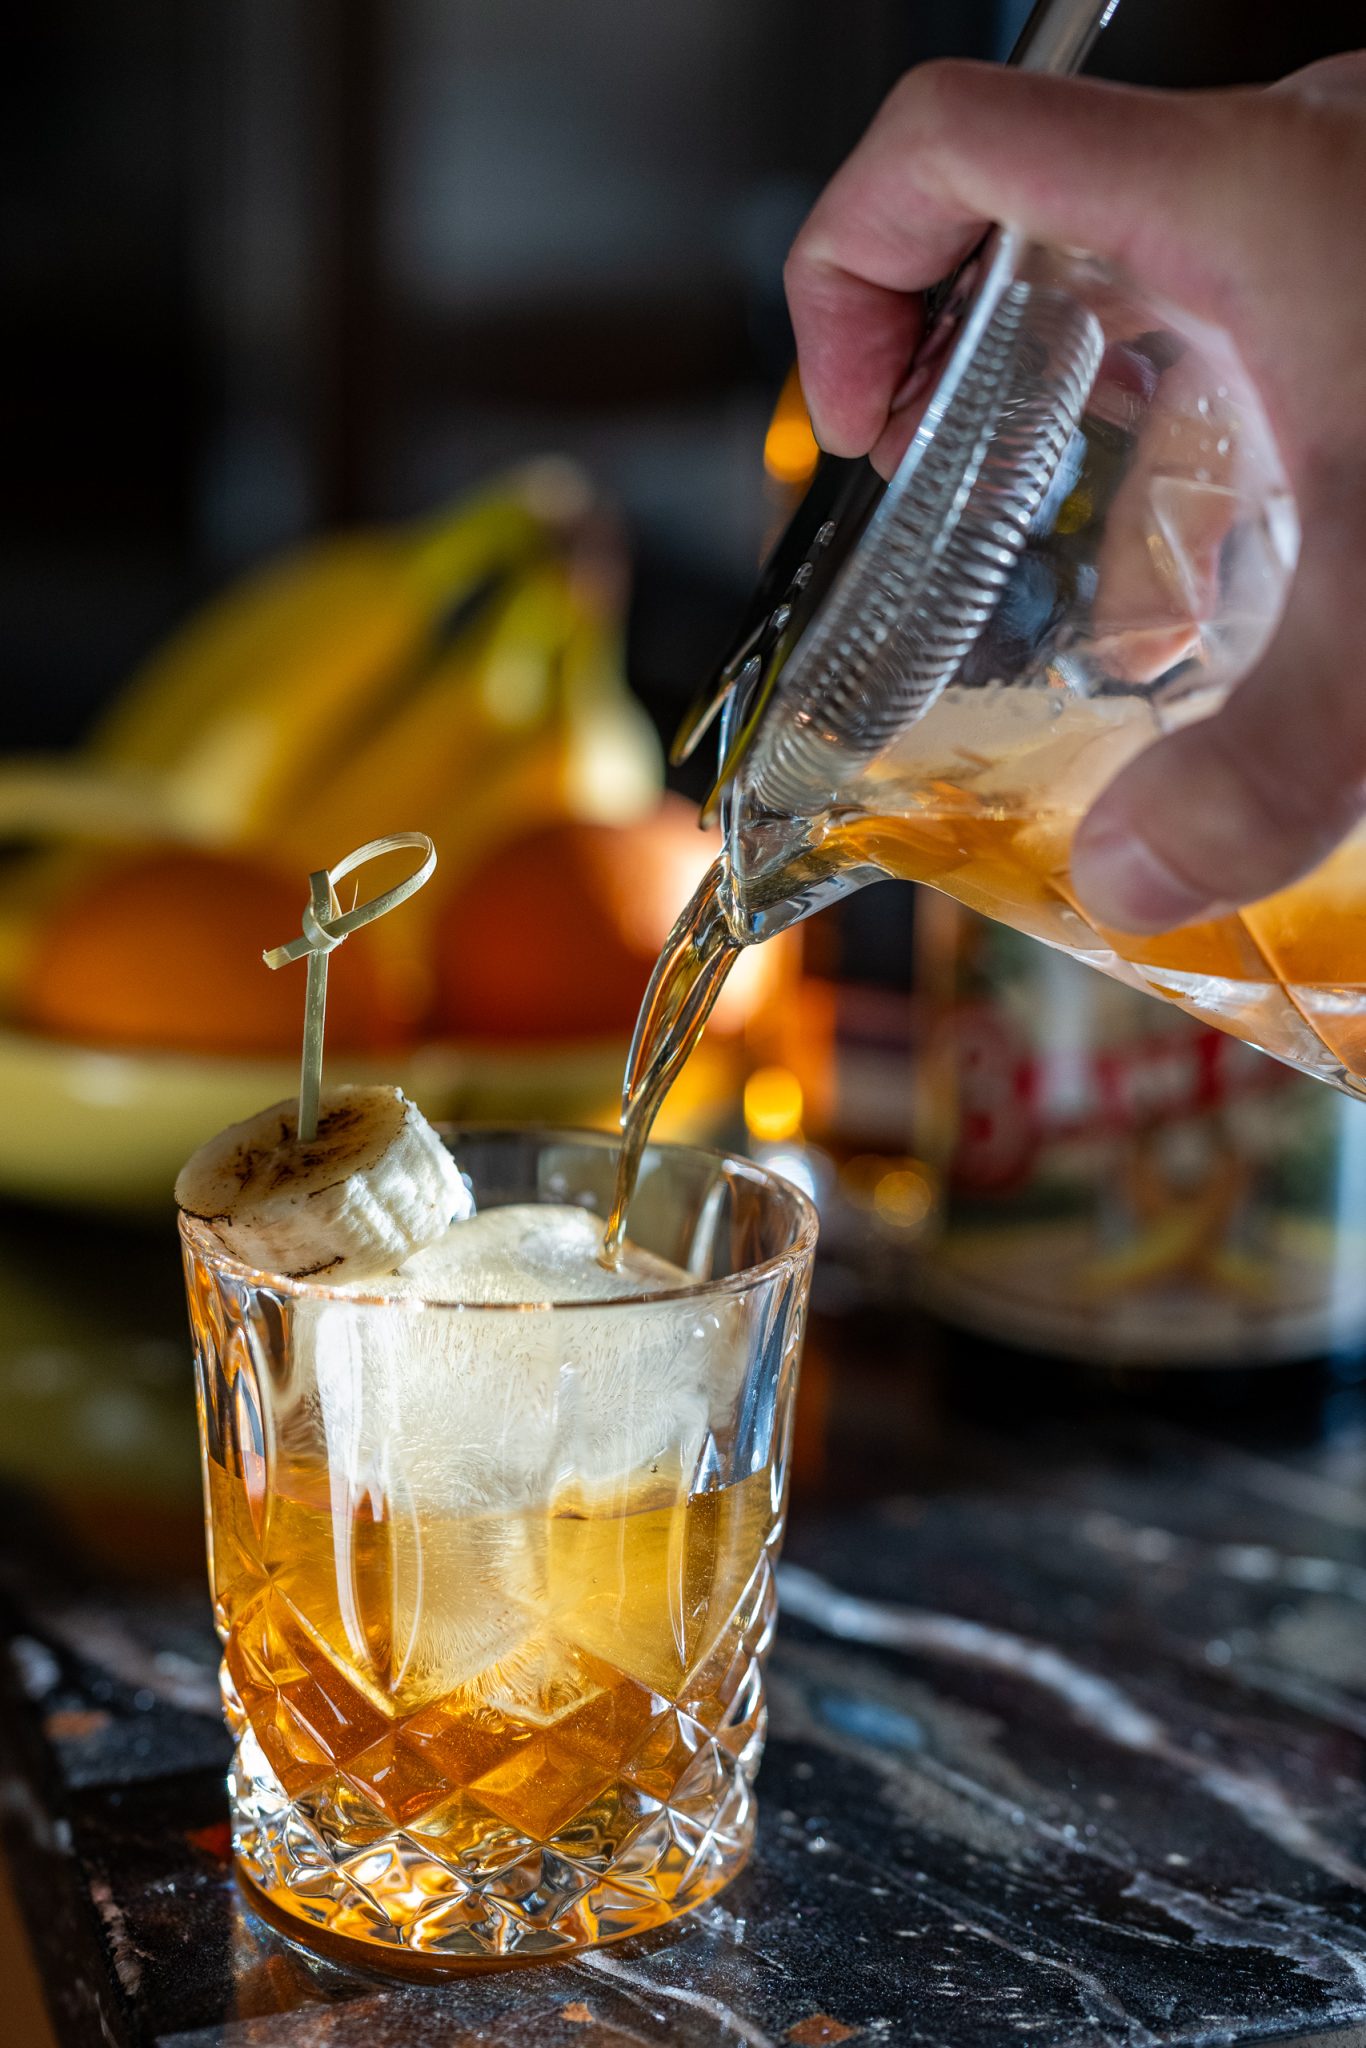 Banana old fashioned cocktail pouring into glass